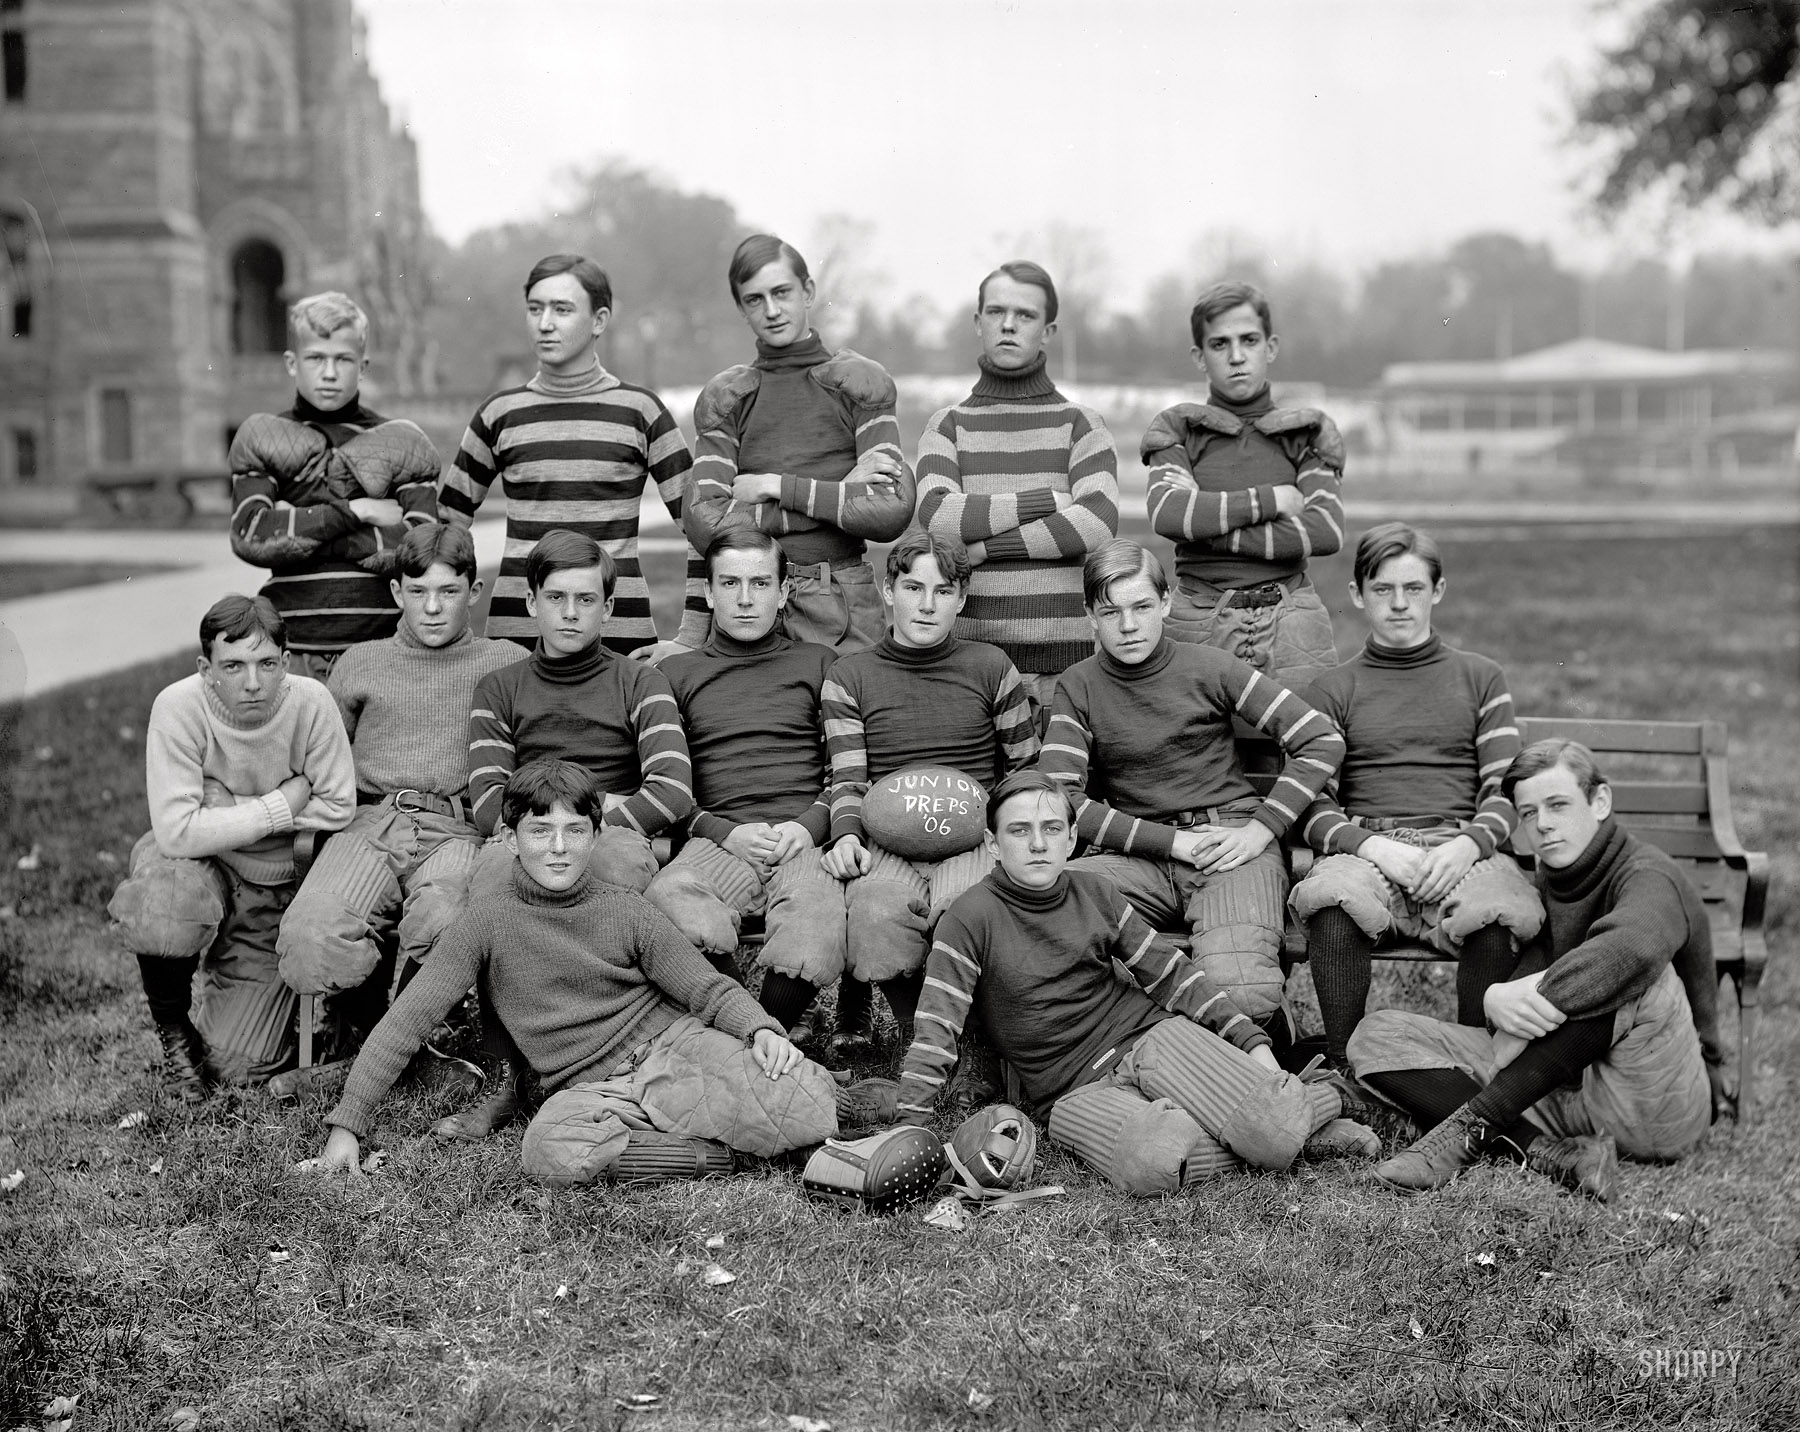 Washington, D.C., 1906. "Georgetown football (junior)." 8x10 inch glass negative, Harris & Ewing Collection. View full size.